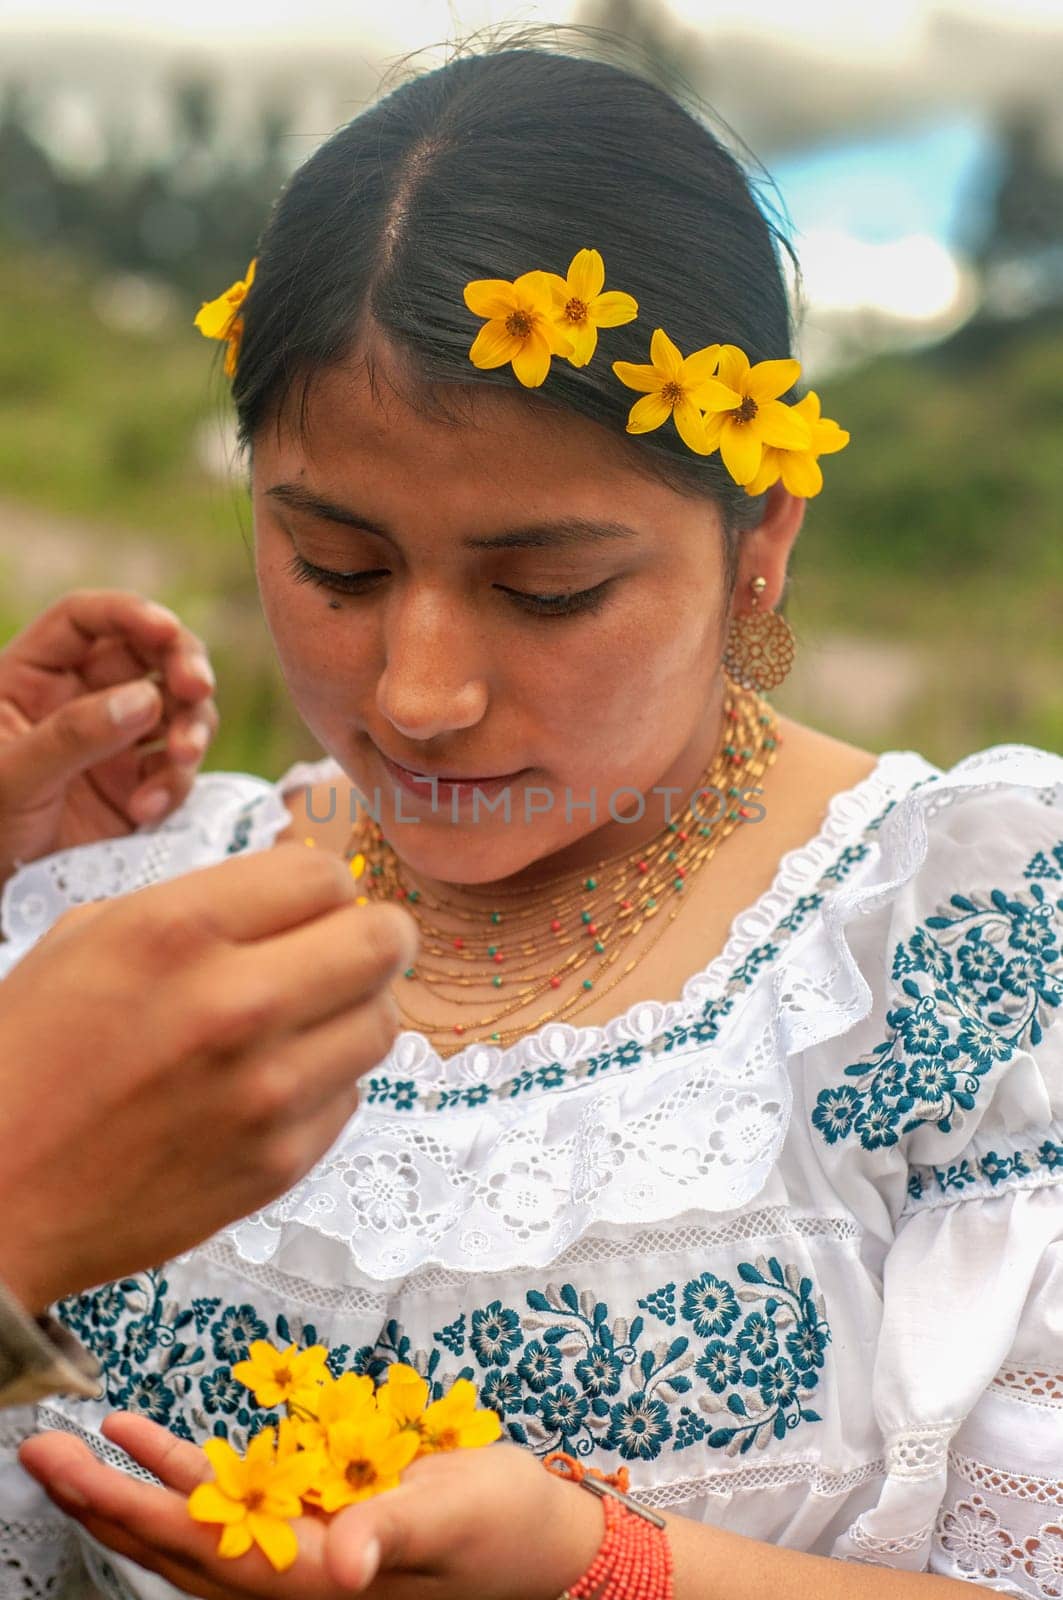 A serene moment captures a young woman in traditional Ecuadorian attire, gently placing vibrant yellow flowers against her hair, symbolizing a connection to her cultural heritage.